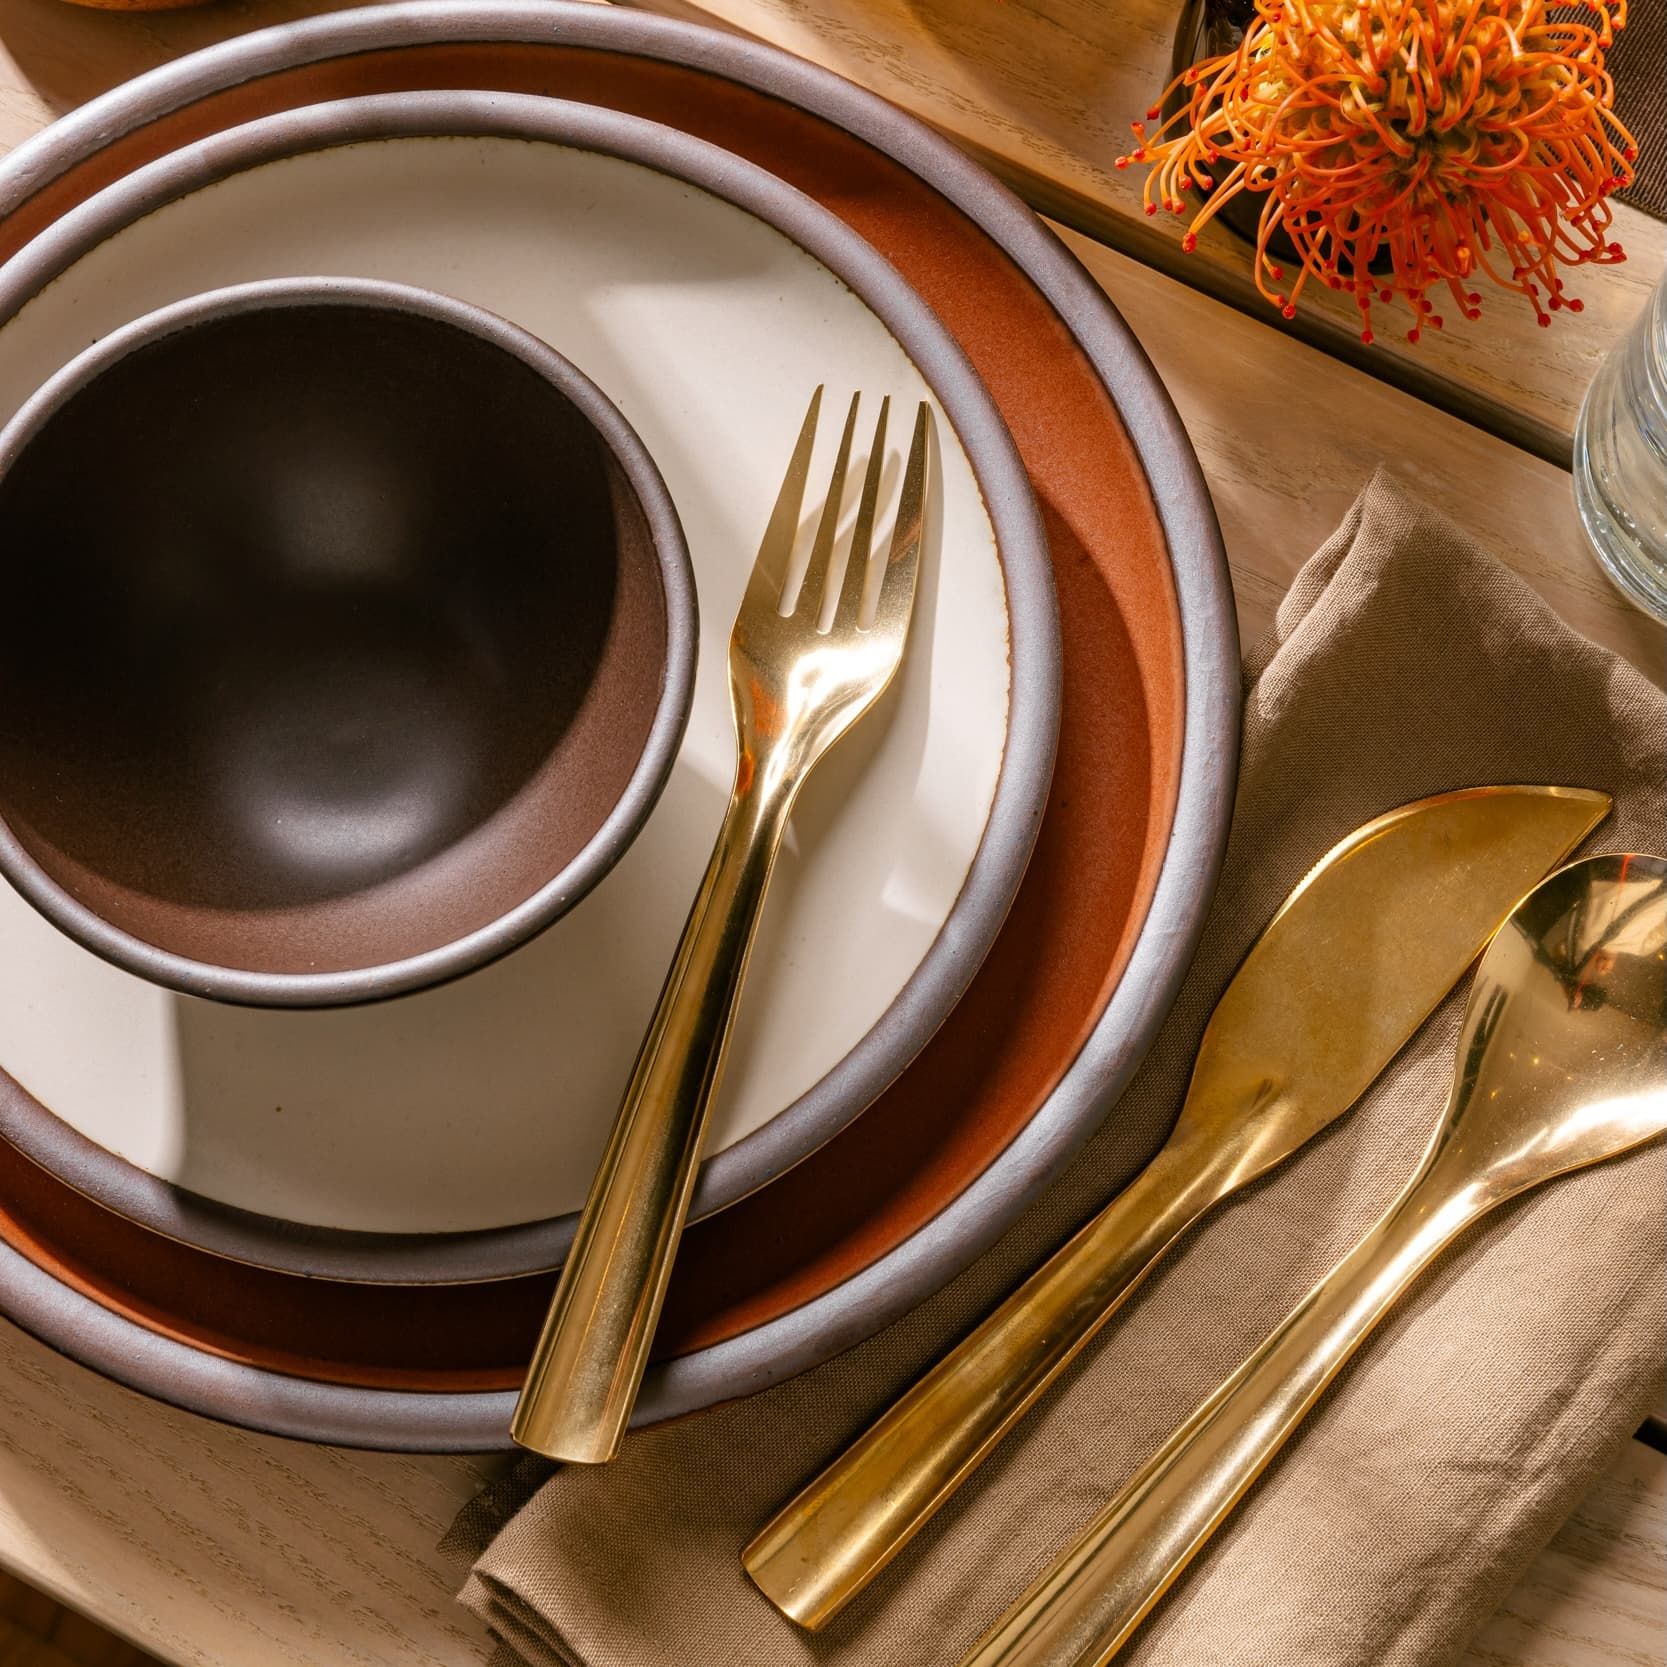 On a table is a stack of plates and bowl in cool terracotta, cream, and dark brown colors. To the right is a shiny brass fork, knife, and spoon on a natural linen napkin.